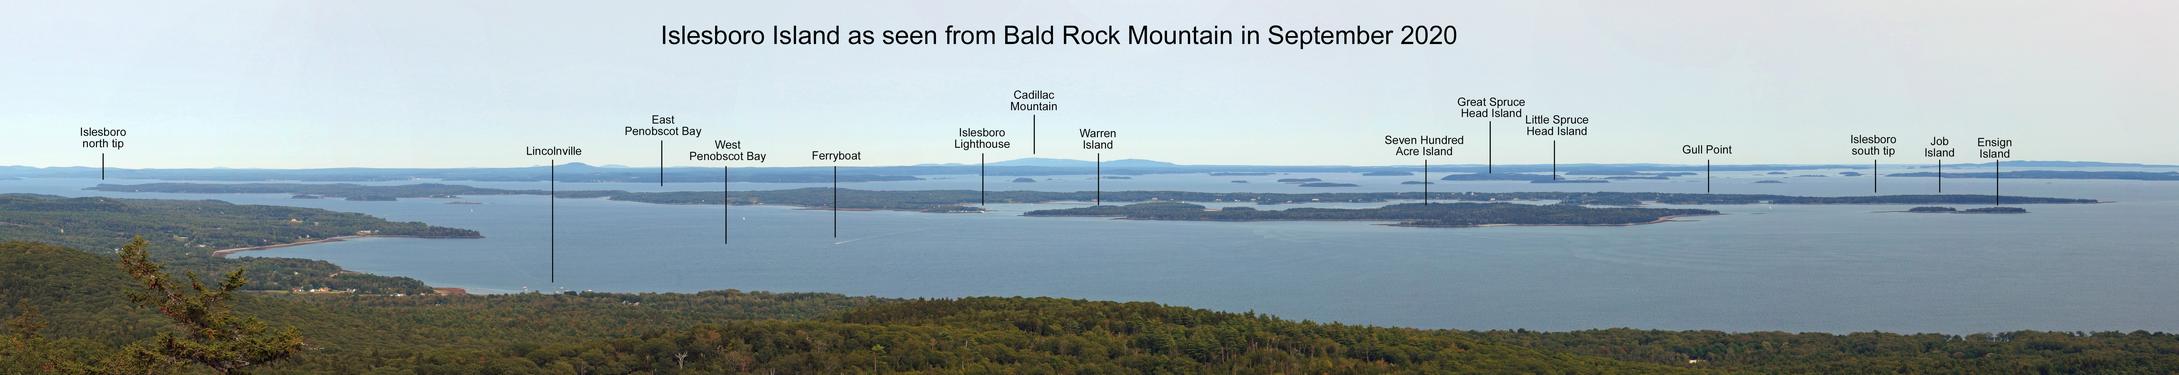 view in September  of Islesboro Island in Penobscot Bay from Bald Rock Mountain in Maine